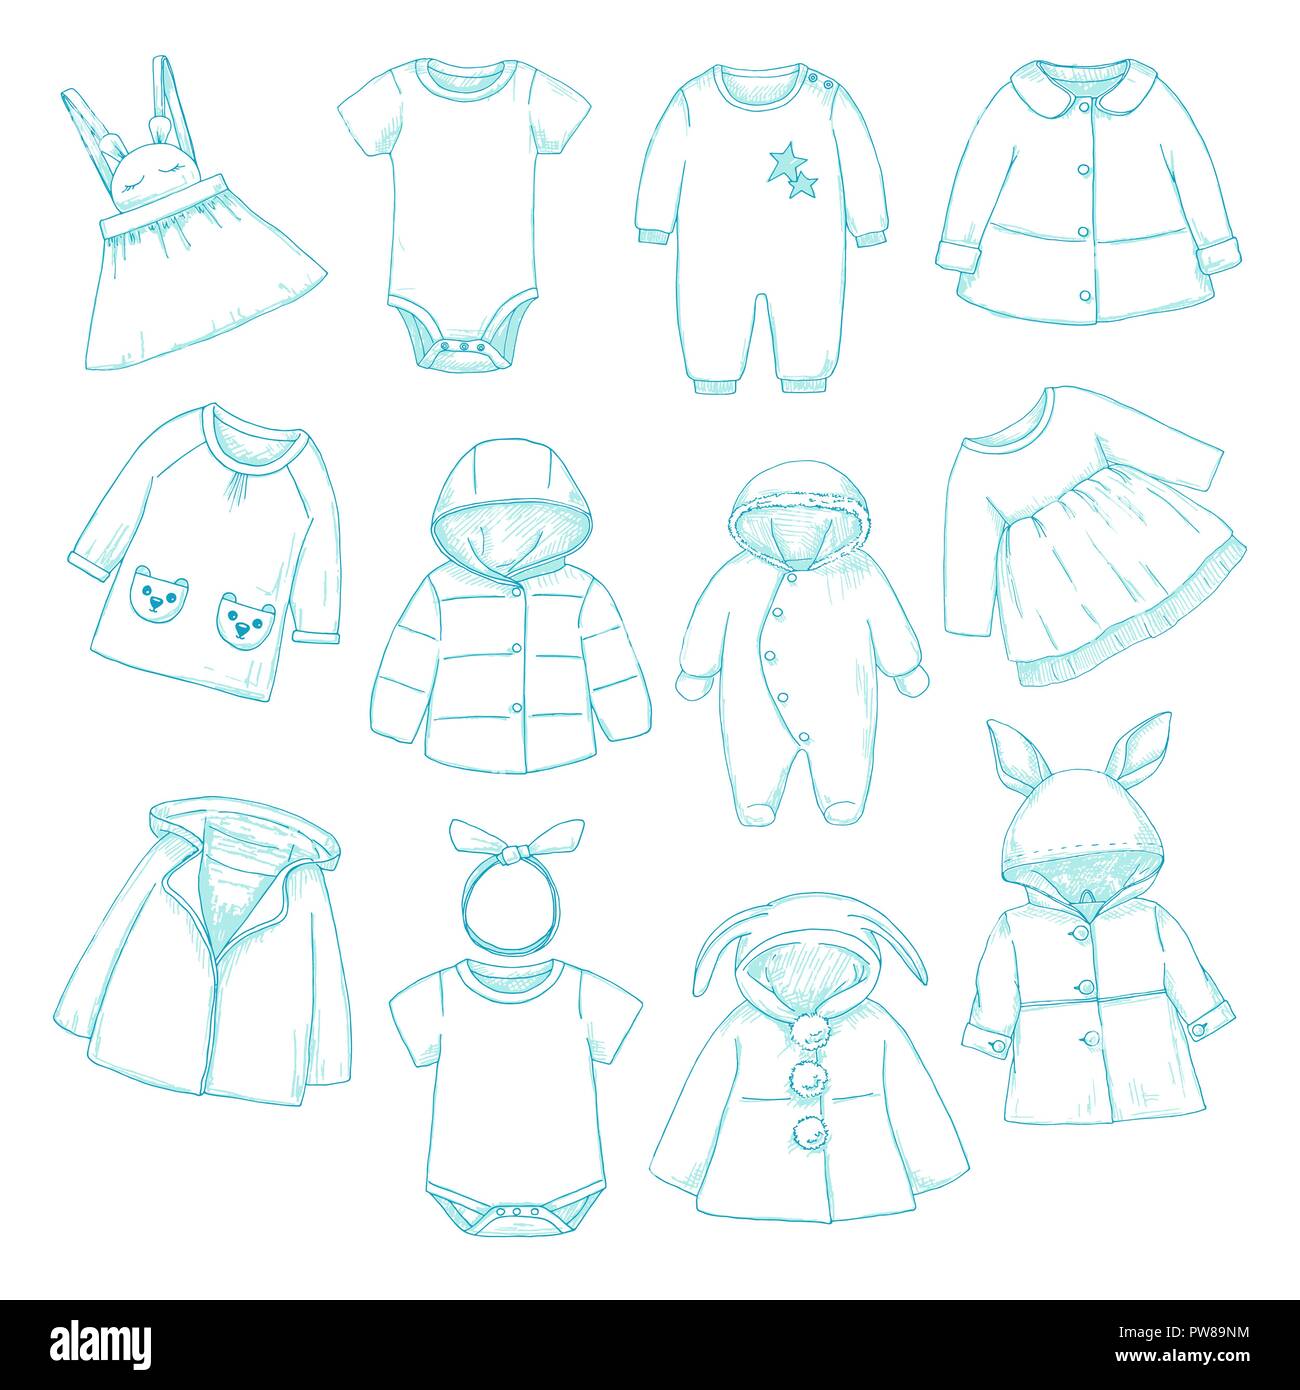 Paper dolls Stock Vector Images - Alamy